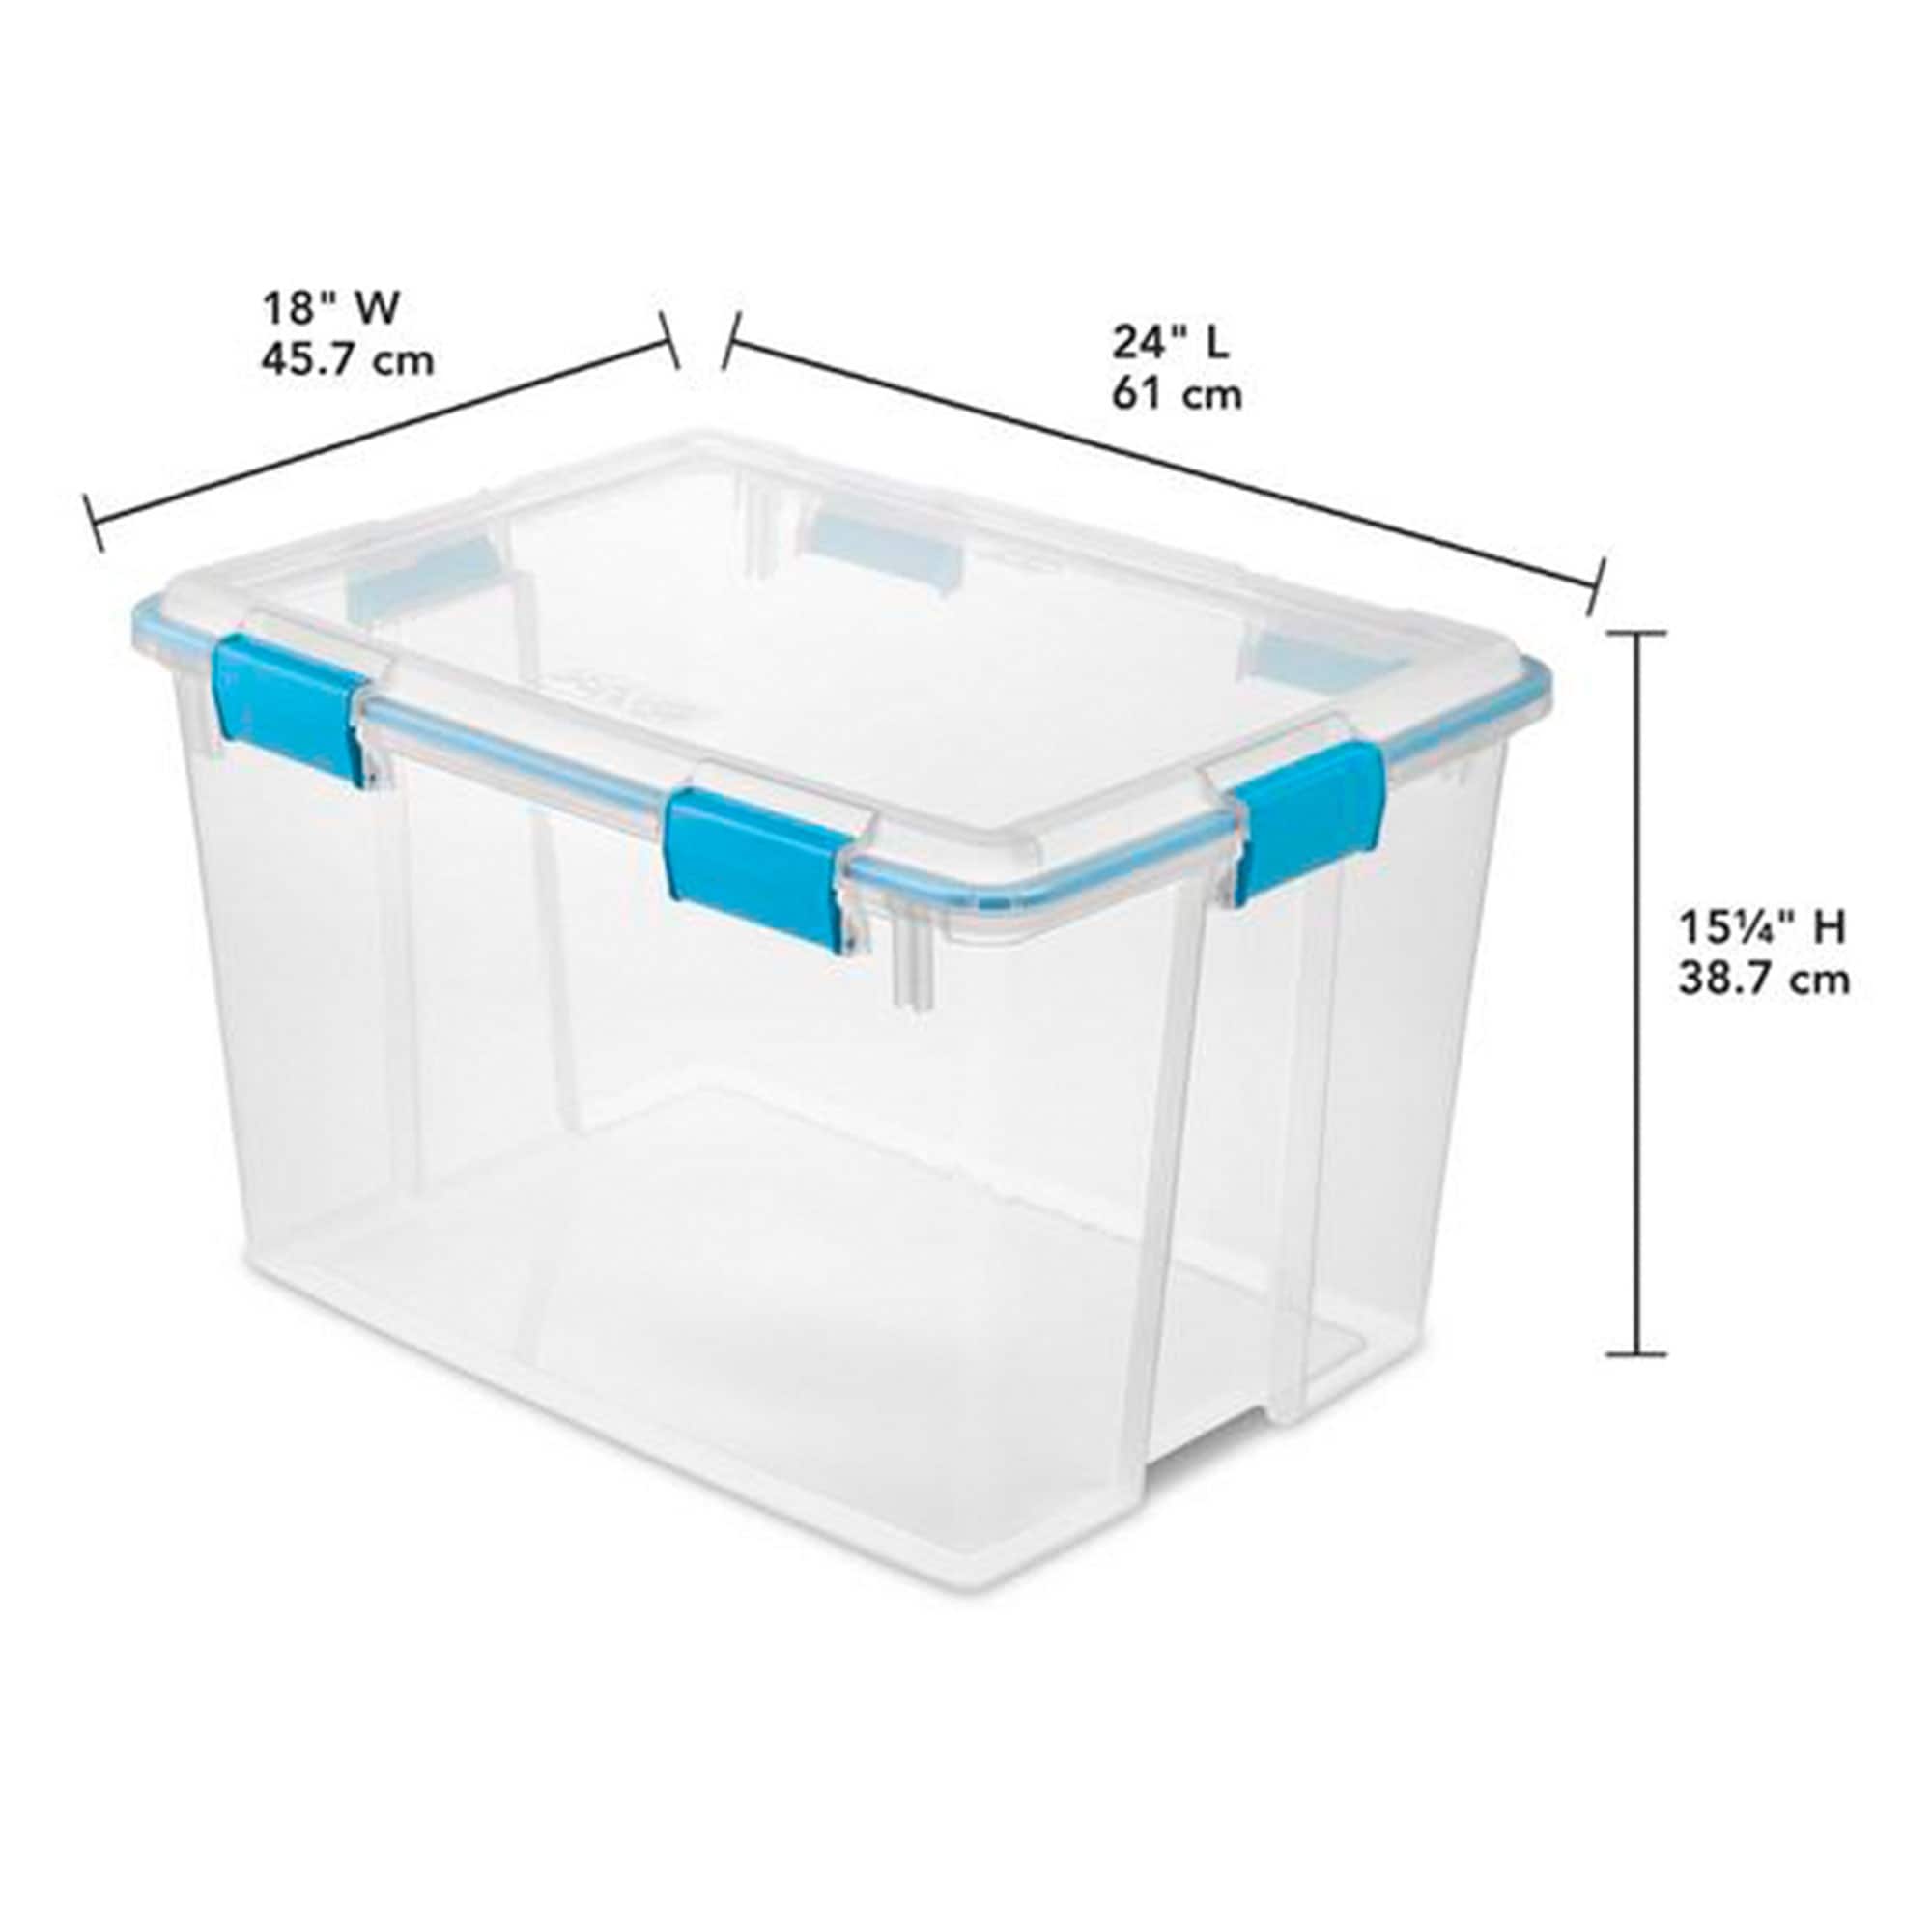 https://ak1.ostkcdn.com/images/products/is/images/direct/9be0495d62313701a0fb512c72a71226f0af47fd/Sterilite-80-Qt-Clear-Plastic-Stackable-Storage-Bin-w--Gasket-Latch-Lid%2C-8-Pack.jpg